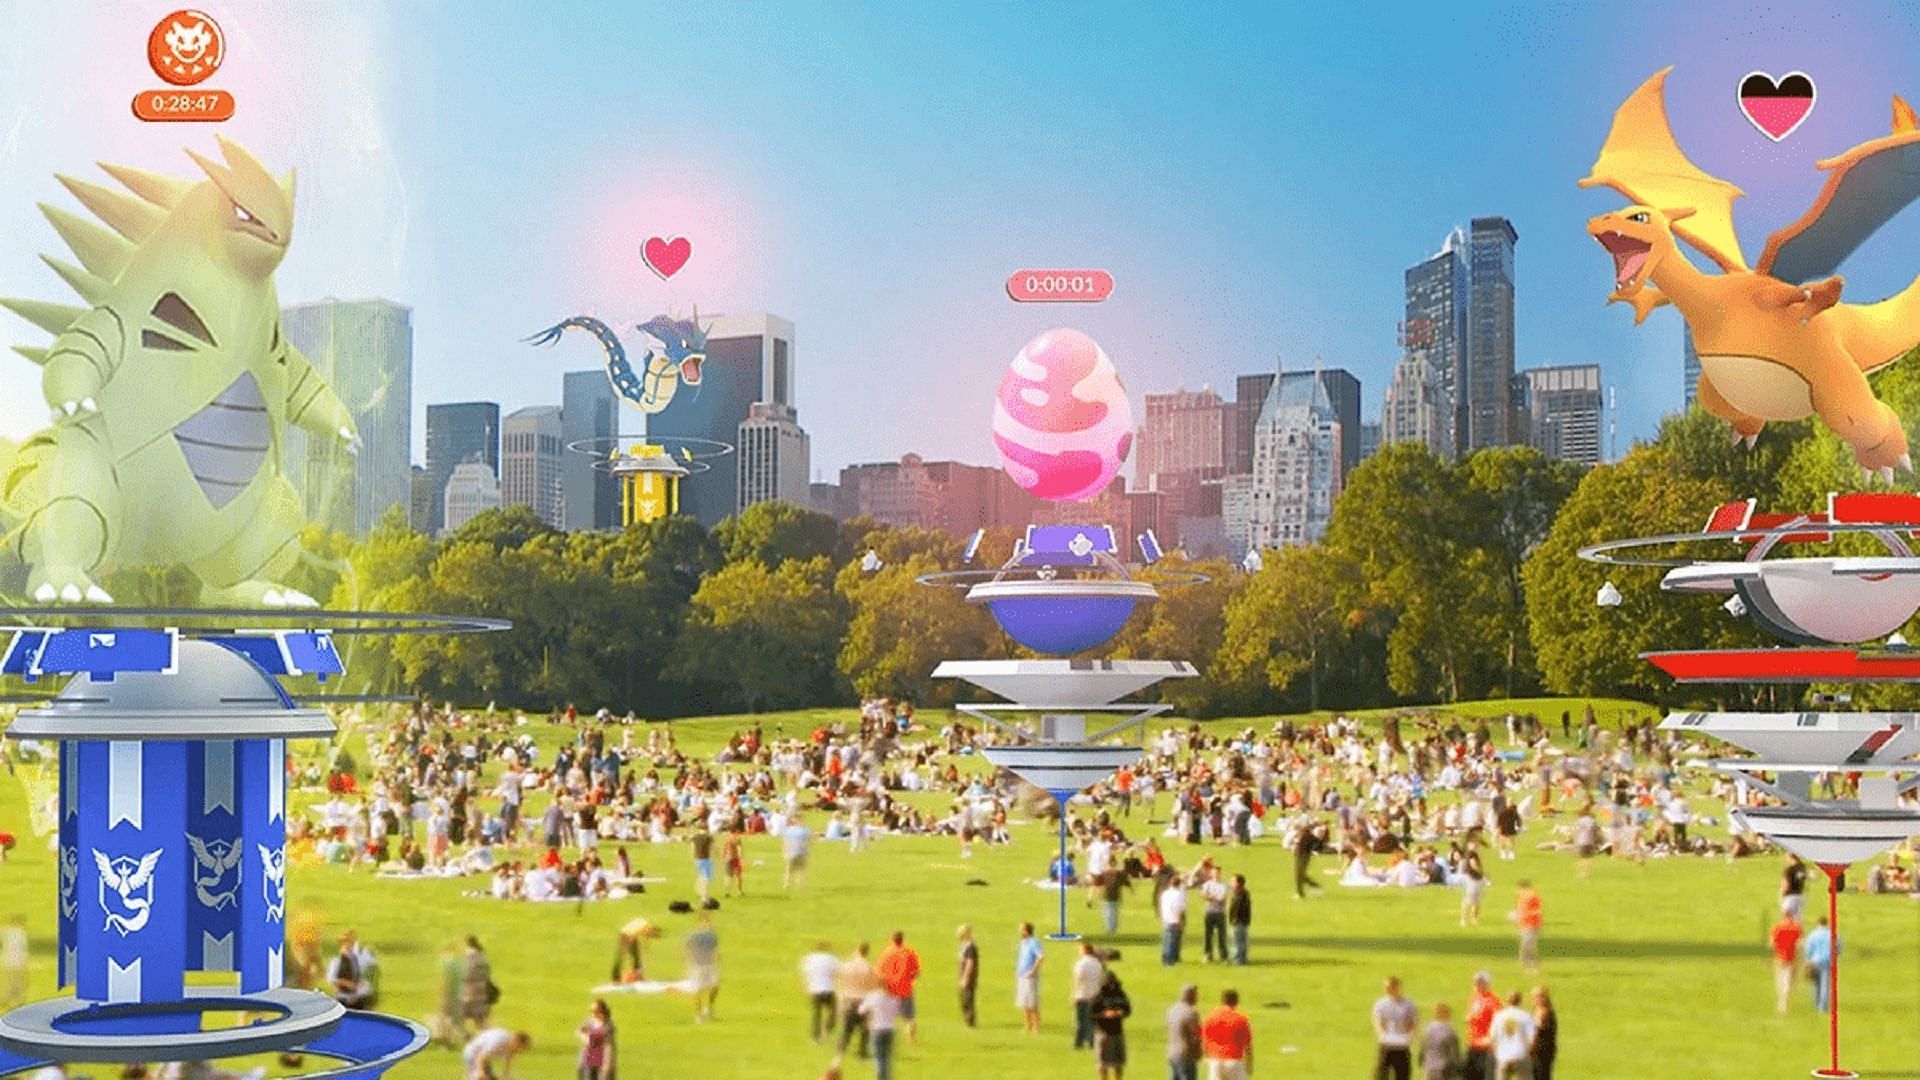 Price changes and raid limits will appear to further hobble remote raiding in Pokemon GO (Image via Niantic)